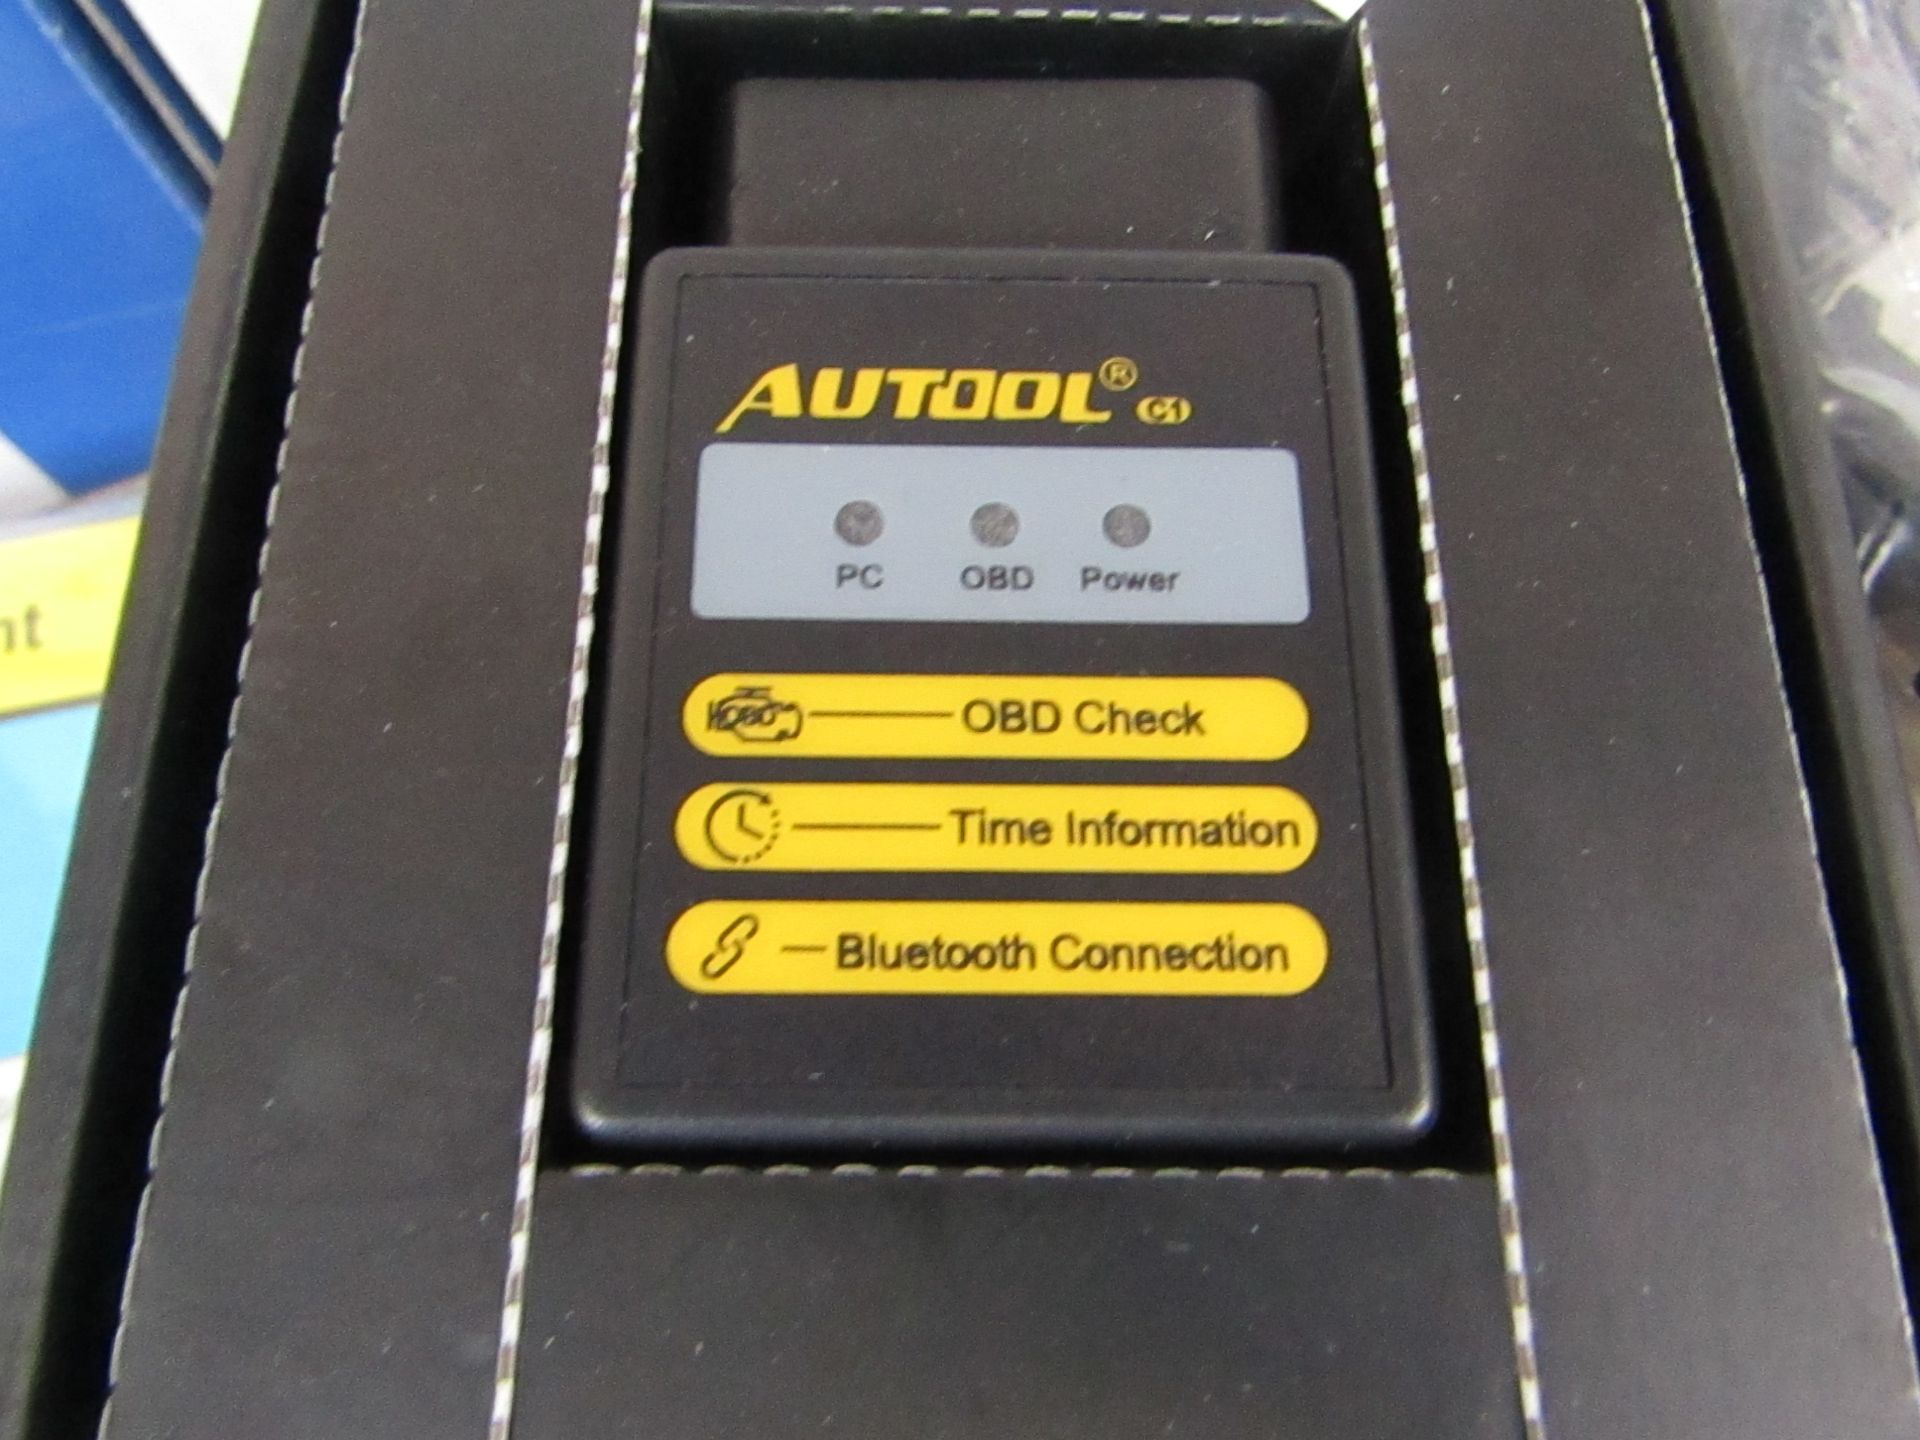 Autotool OBD Scanner, works via Bluetooth onto a app to read fault codes etc, new and boxed